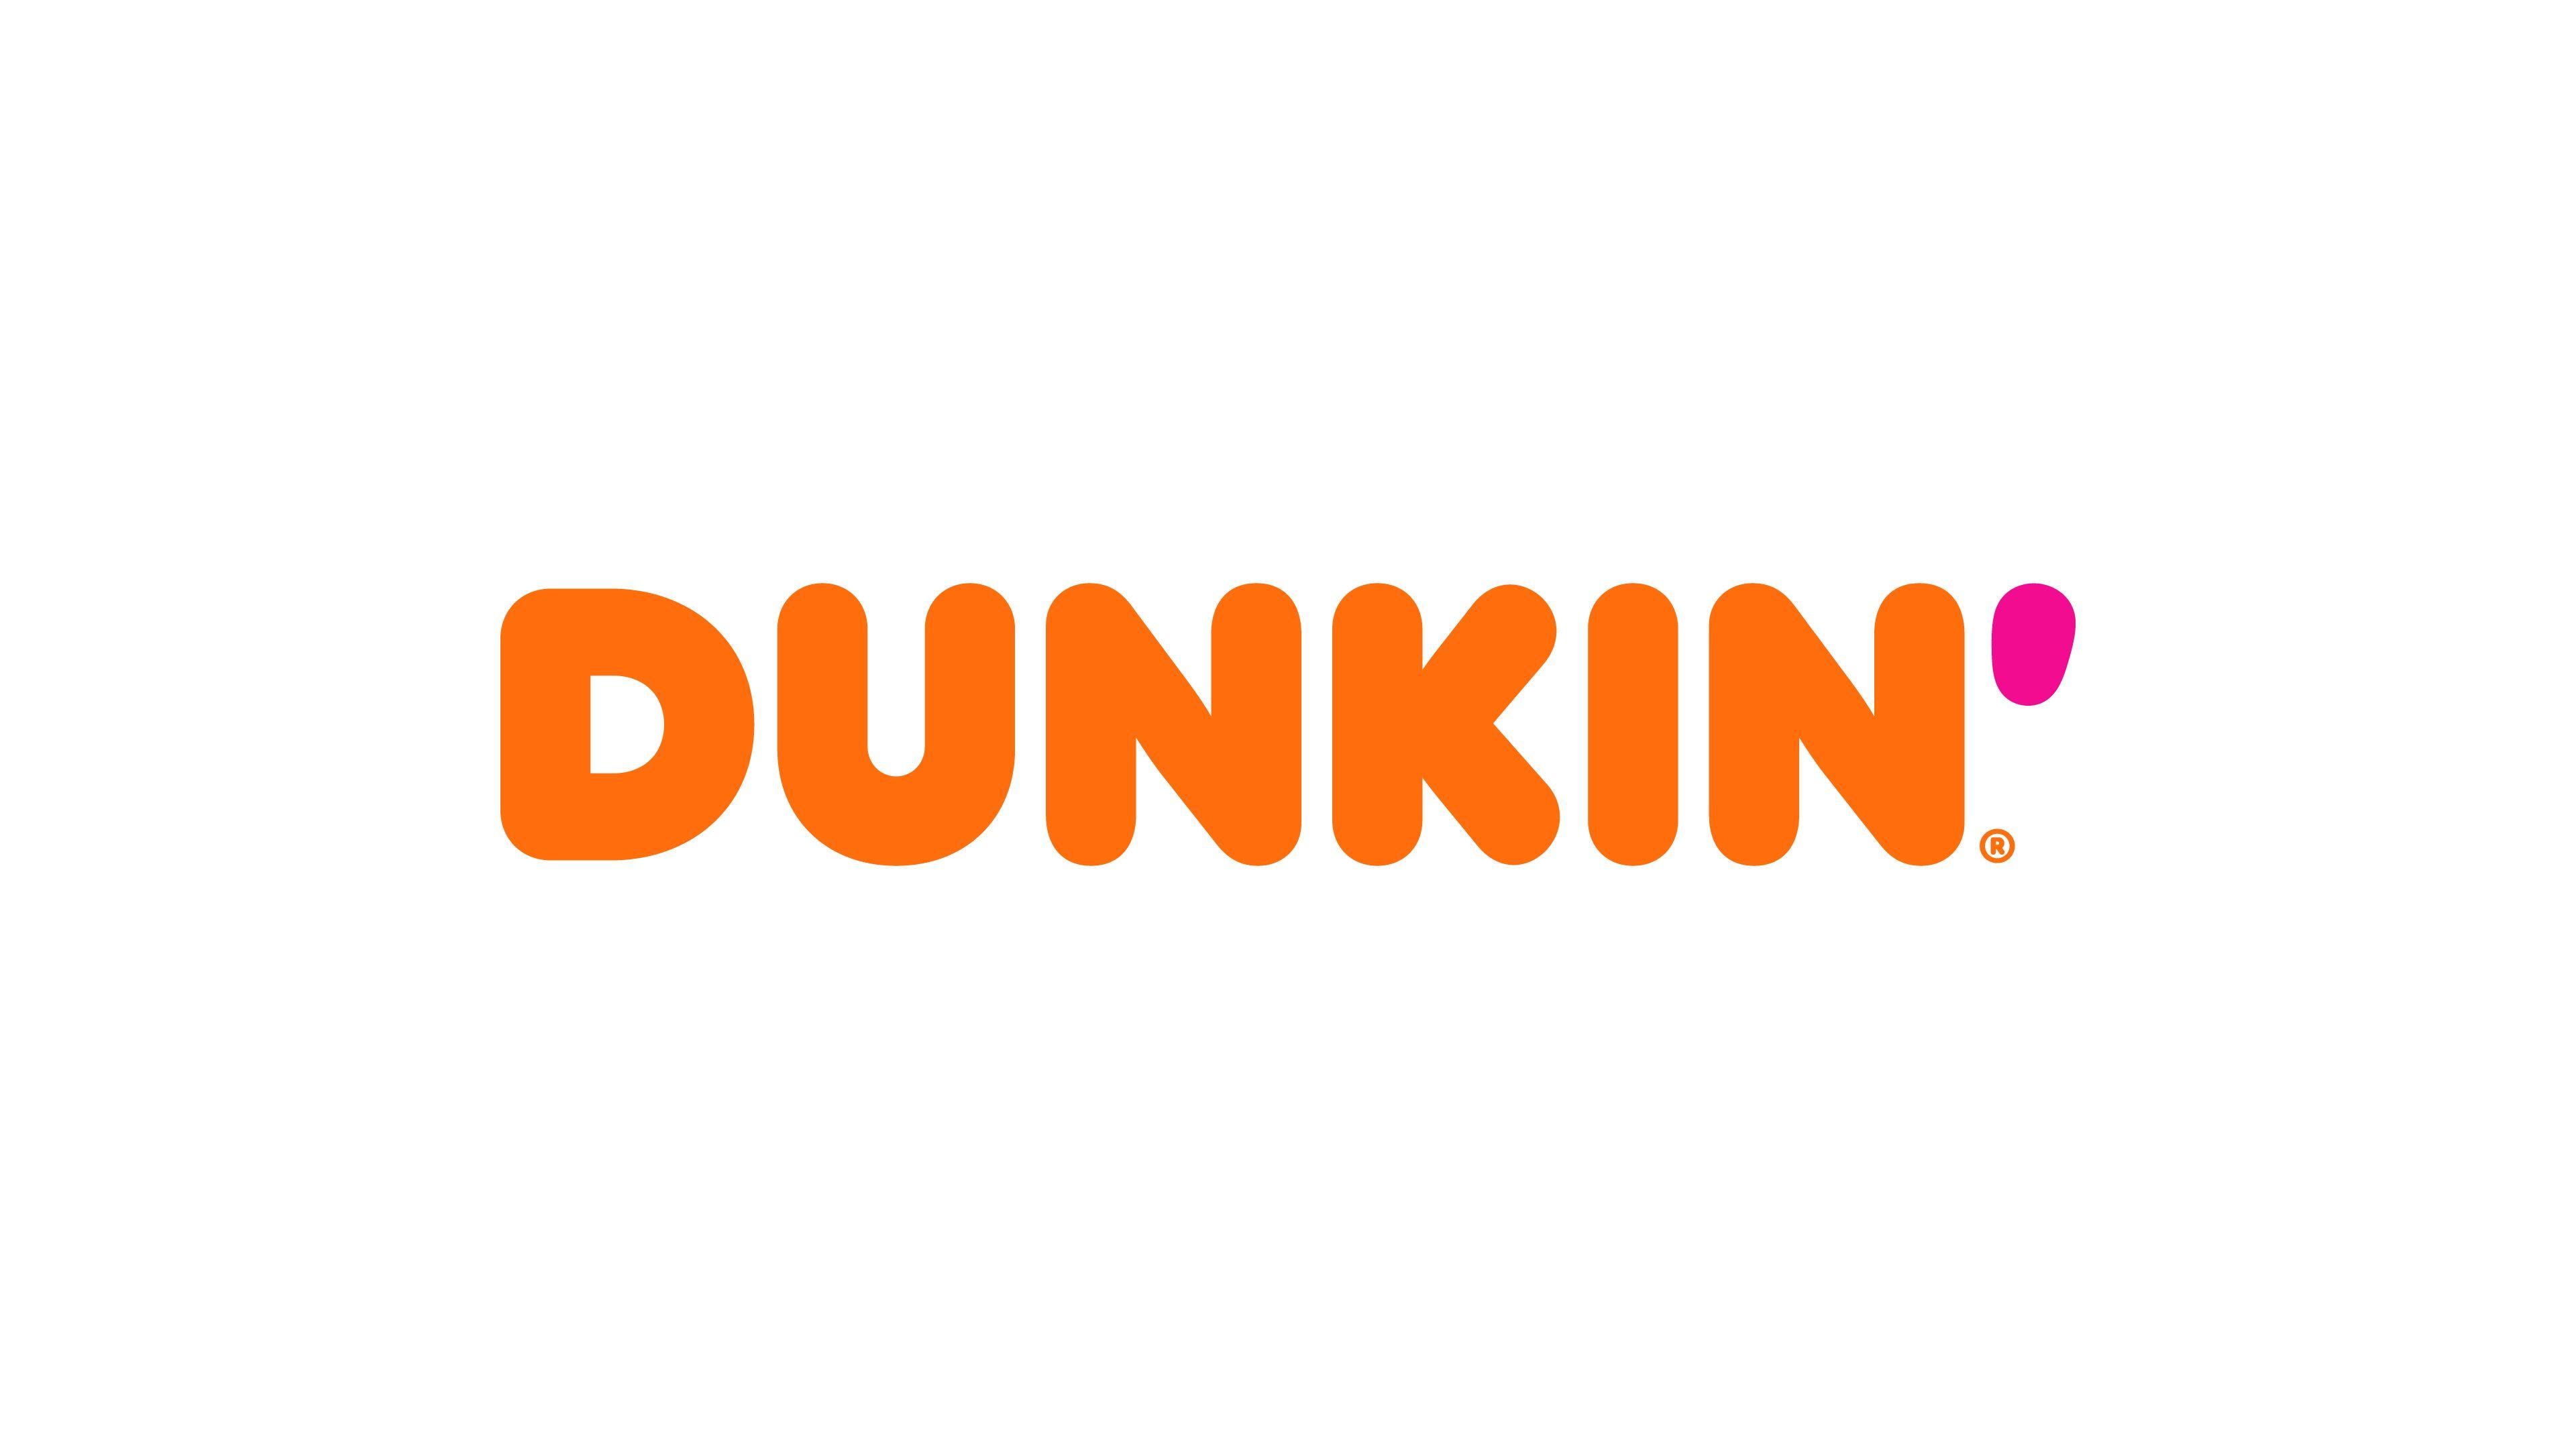 Dunkin' Donuts Logo - Welcome to Dunkin': Dunkin' Donuts Reveals New Brand Identity | Dunkin'